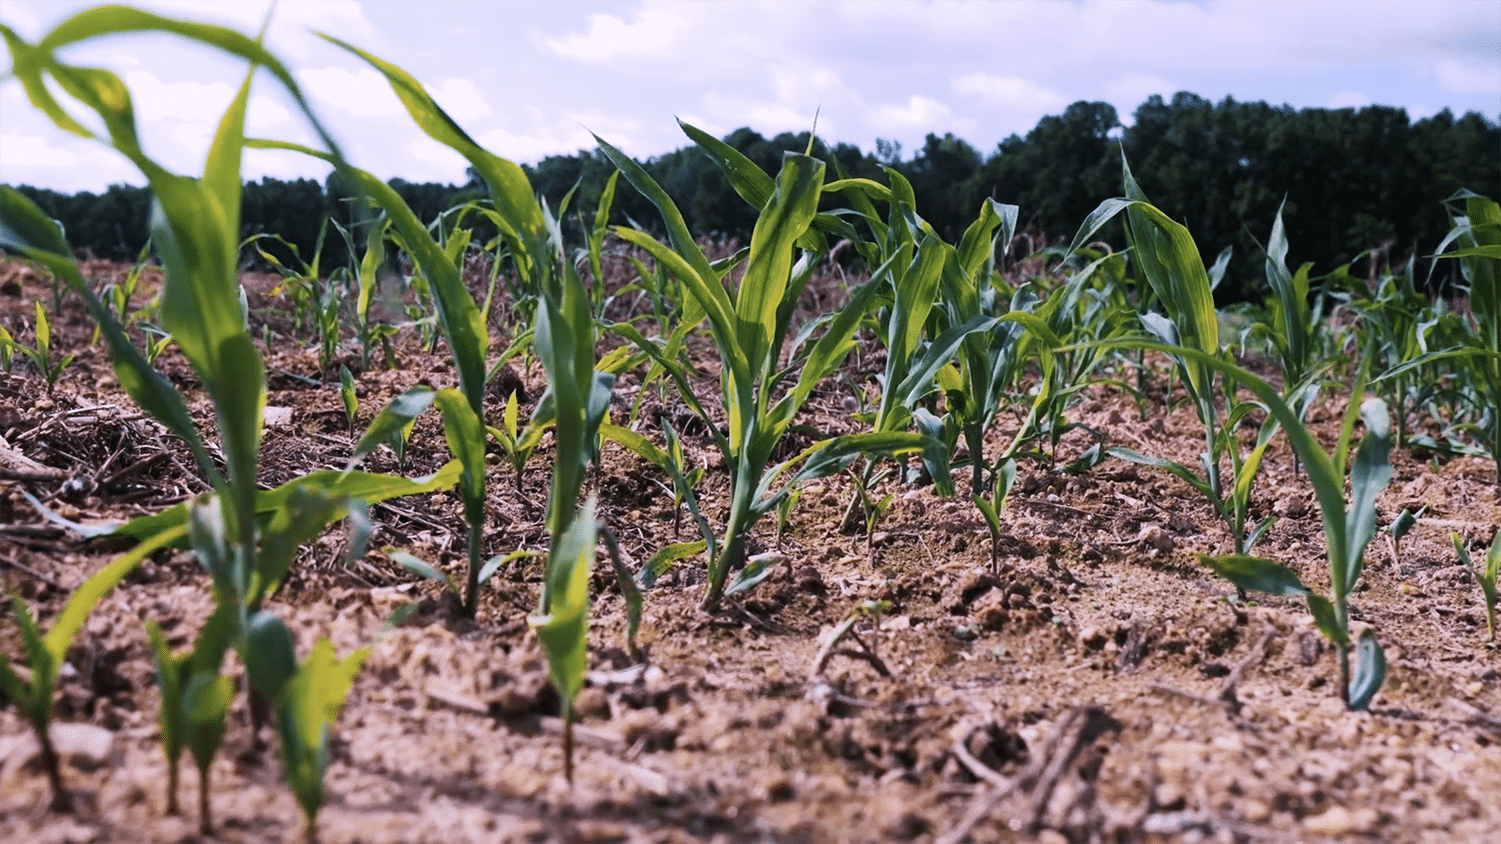 Rows of green crops grow in a field.